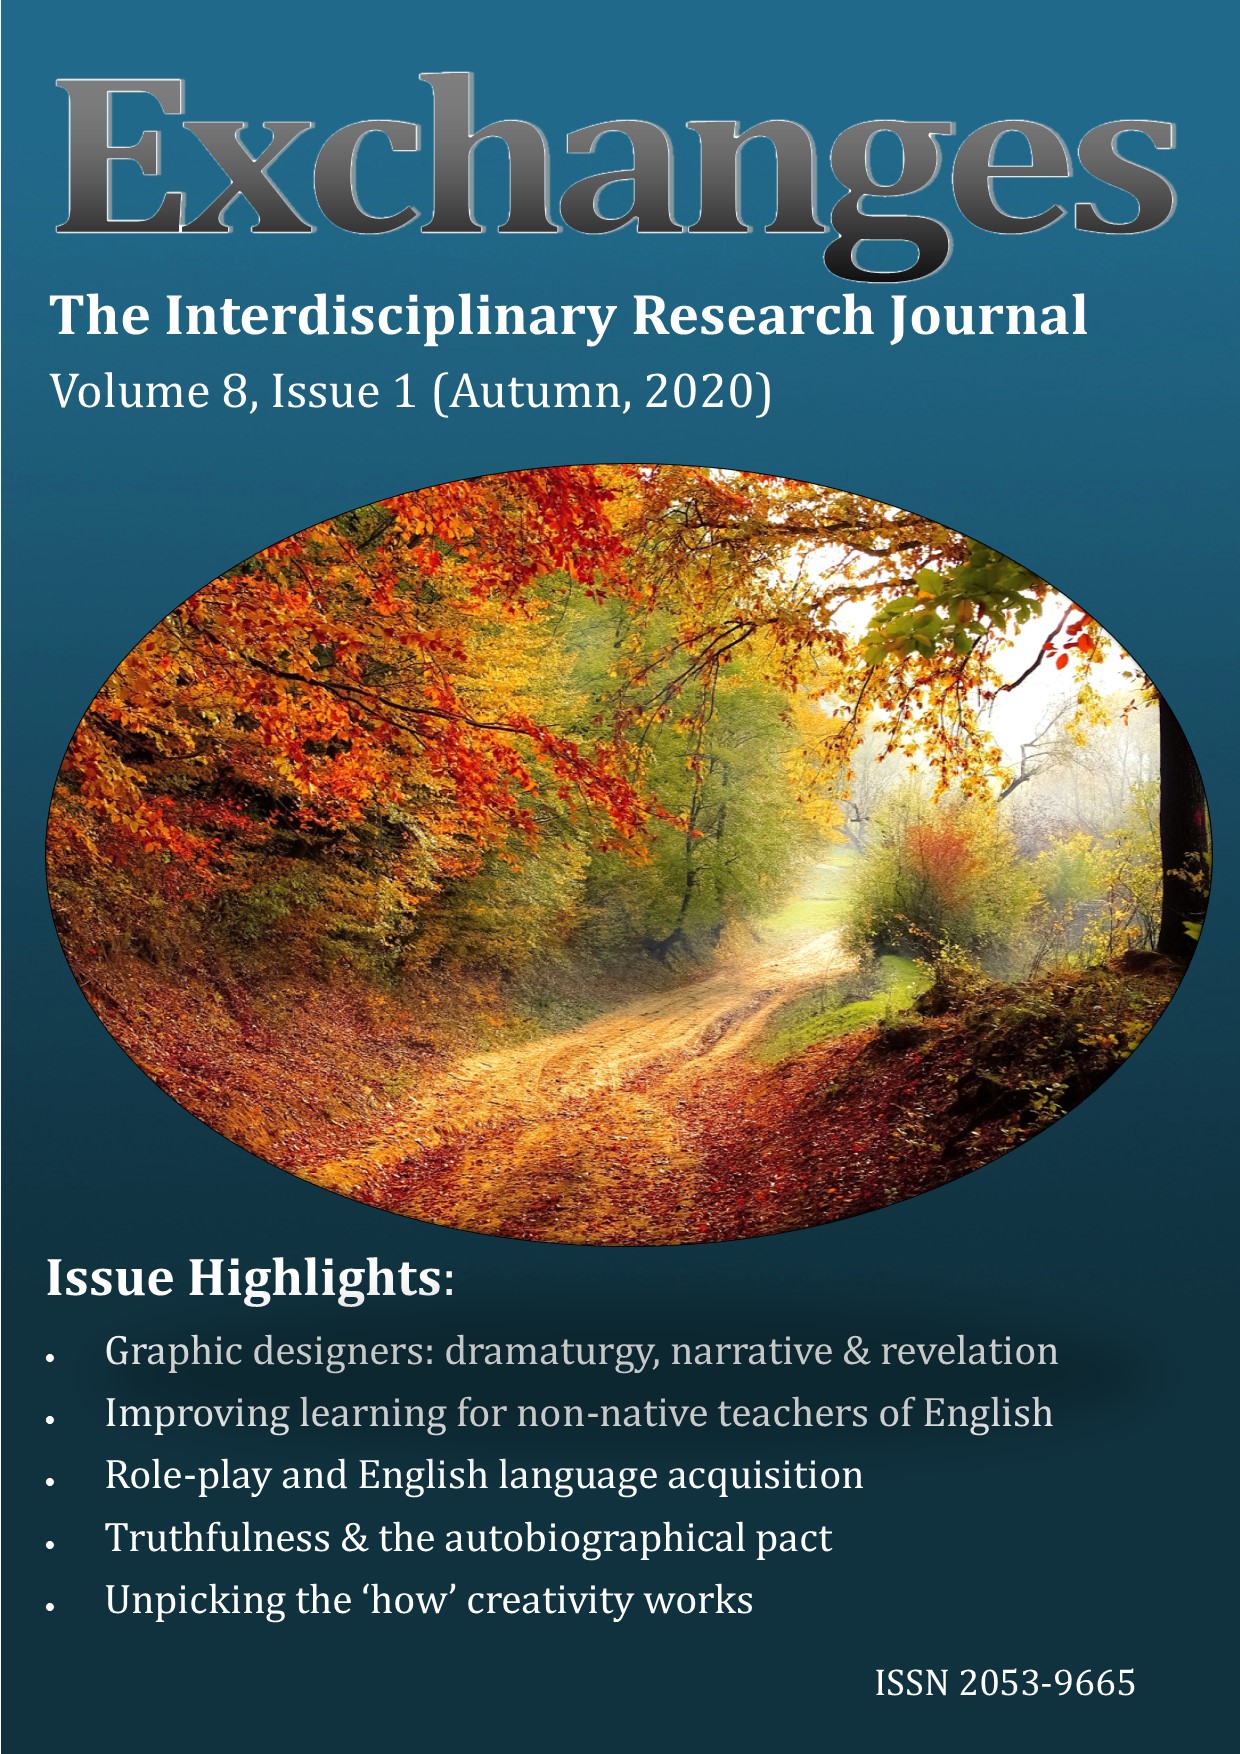 Cover of the journal, highlighting articles and showing an autumnal forest scene